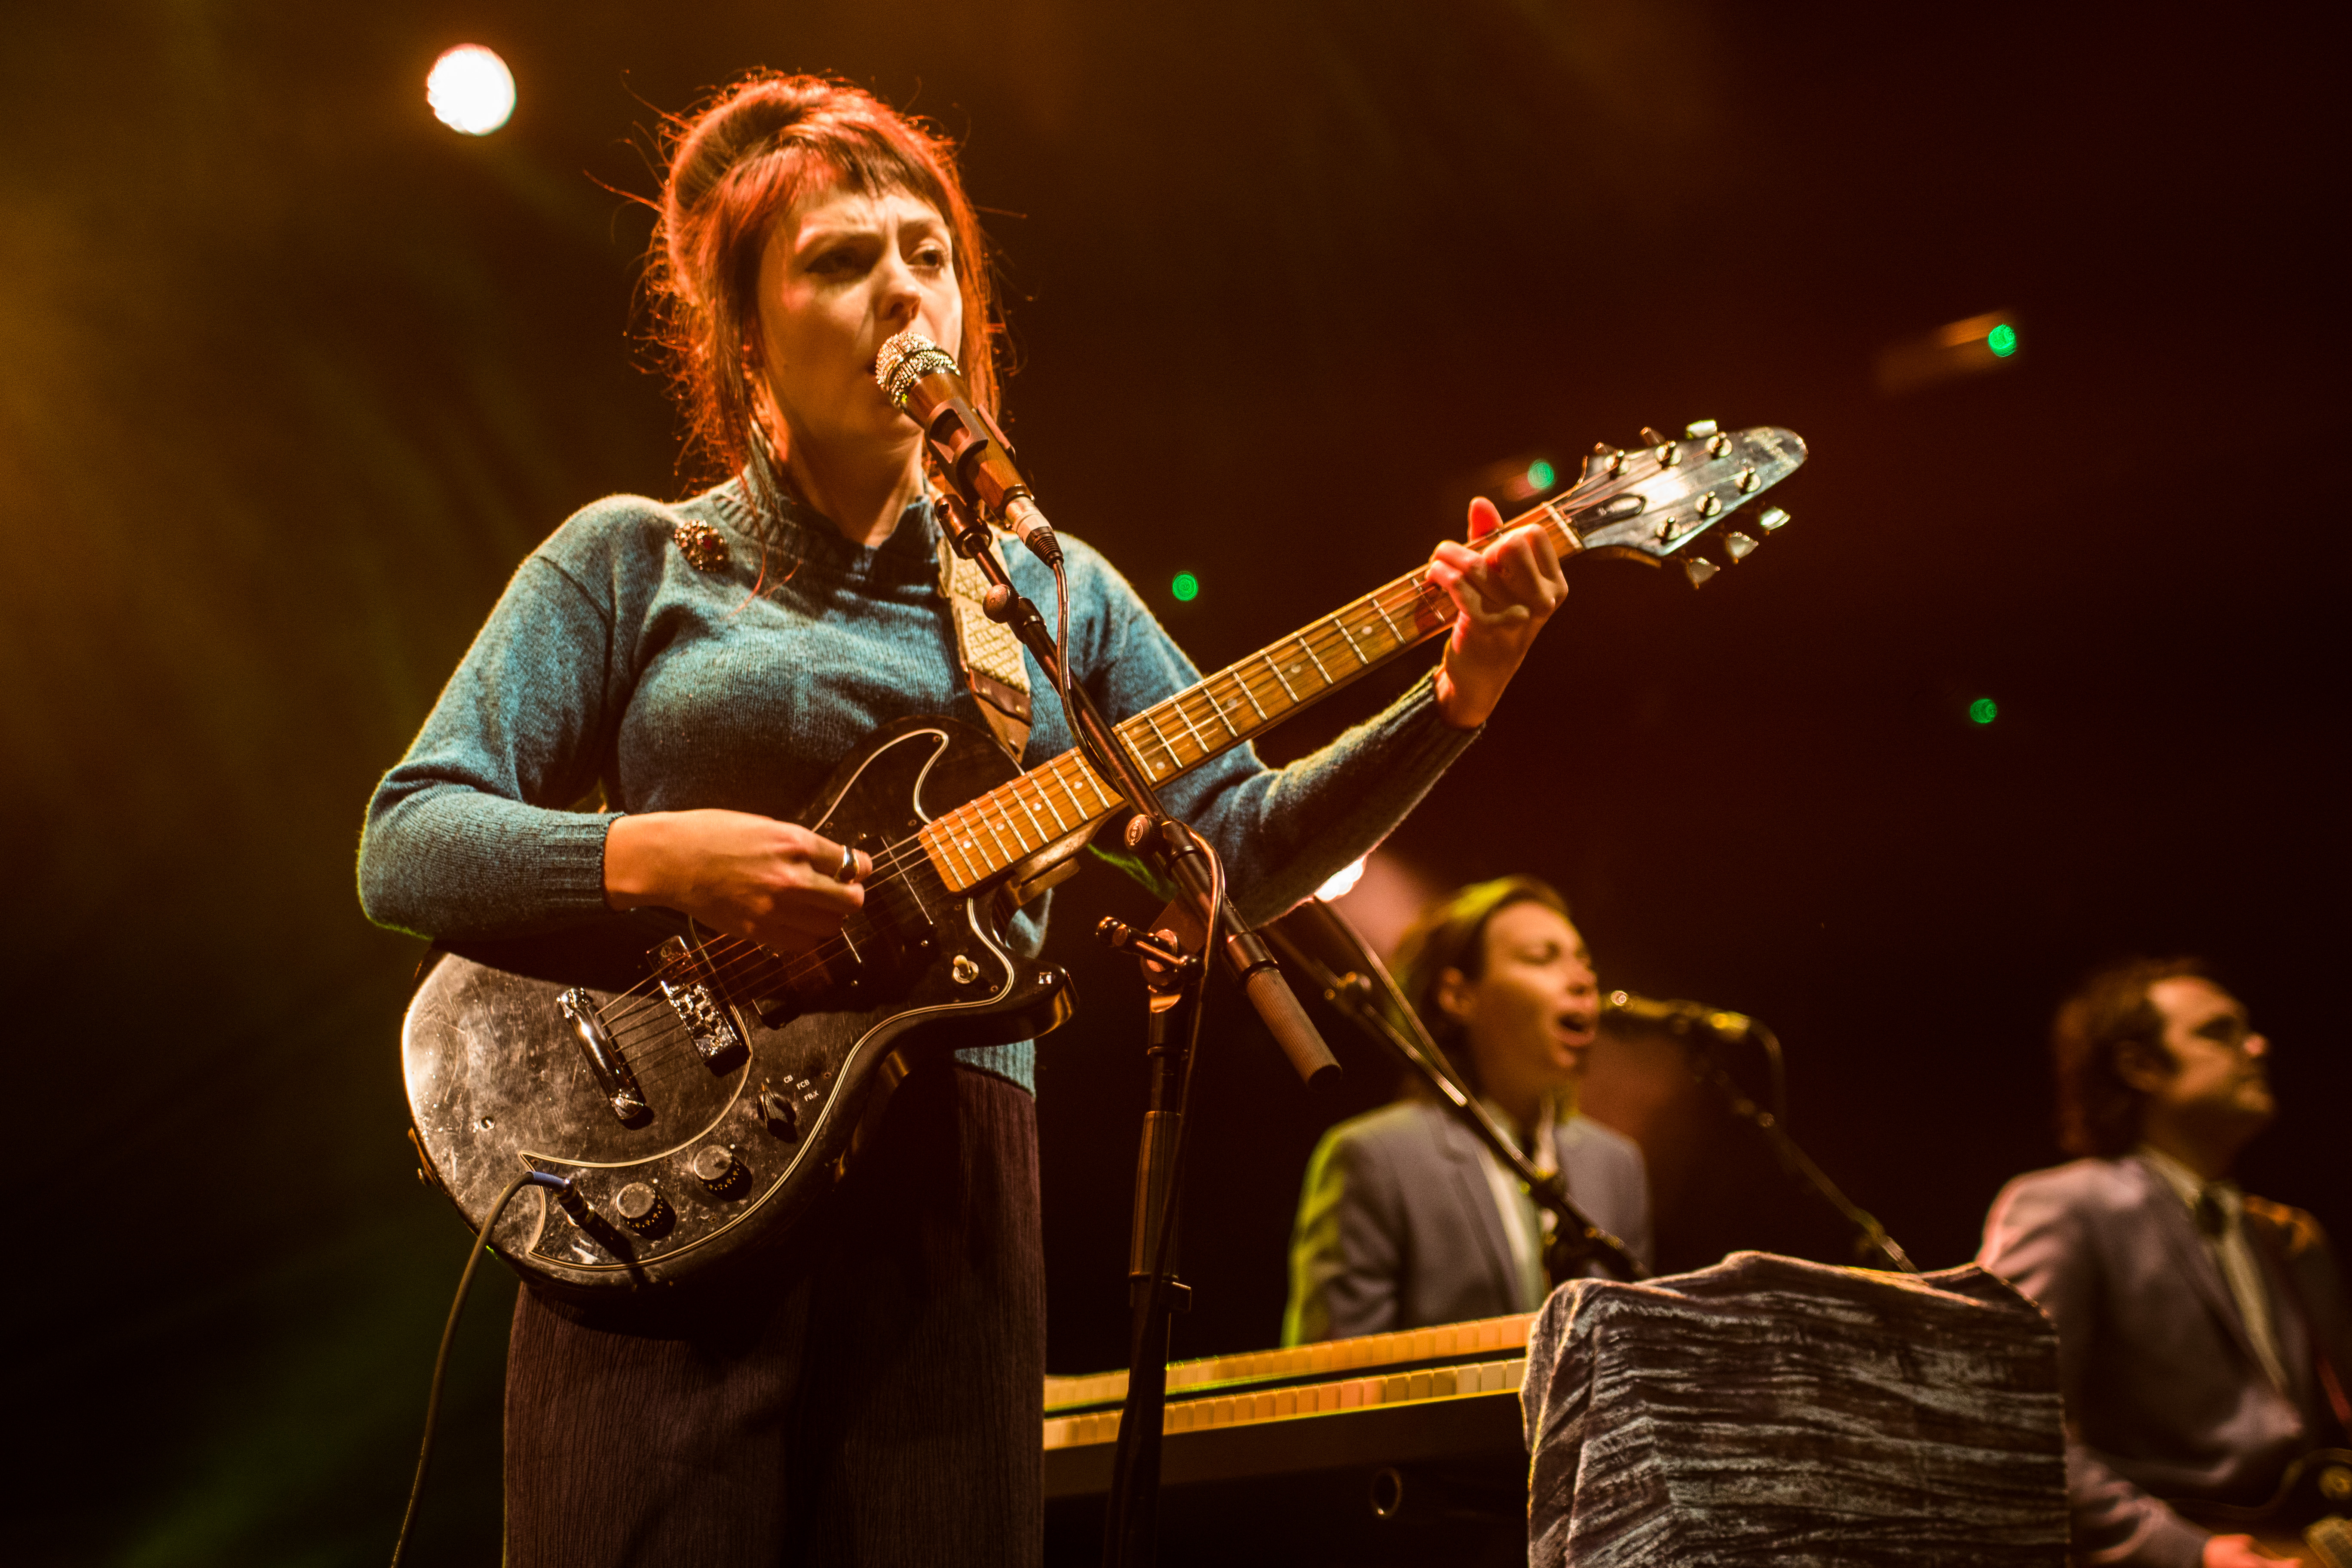 Angel Olsen S Awesome Voice Is Her Vehicle For Naked Emotion Live Review Loud And Quiet